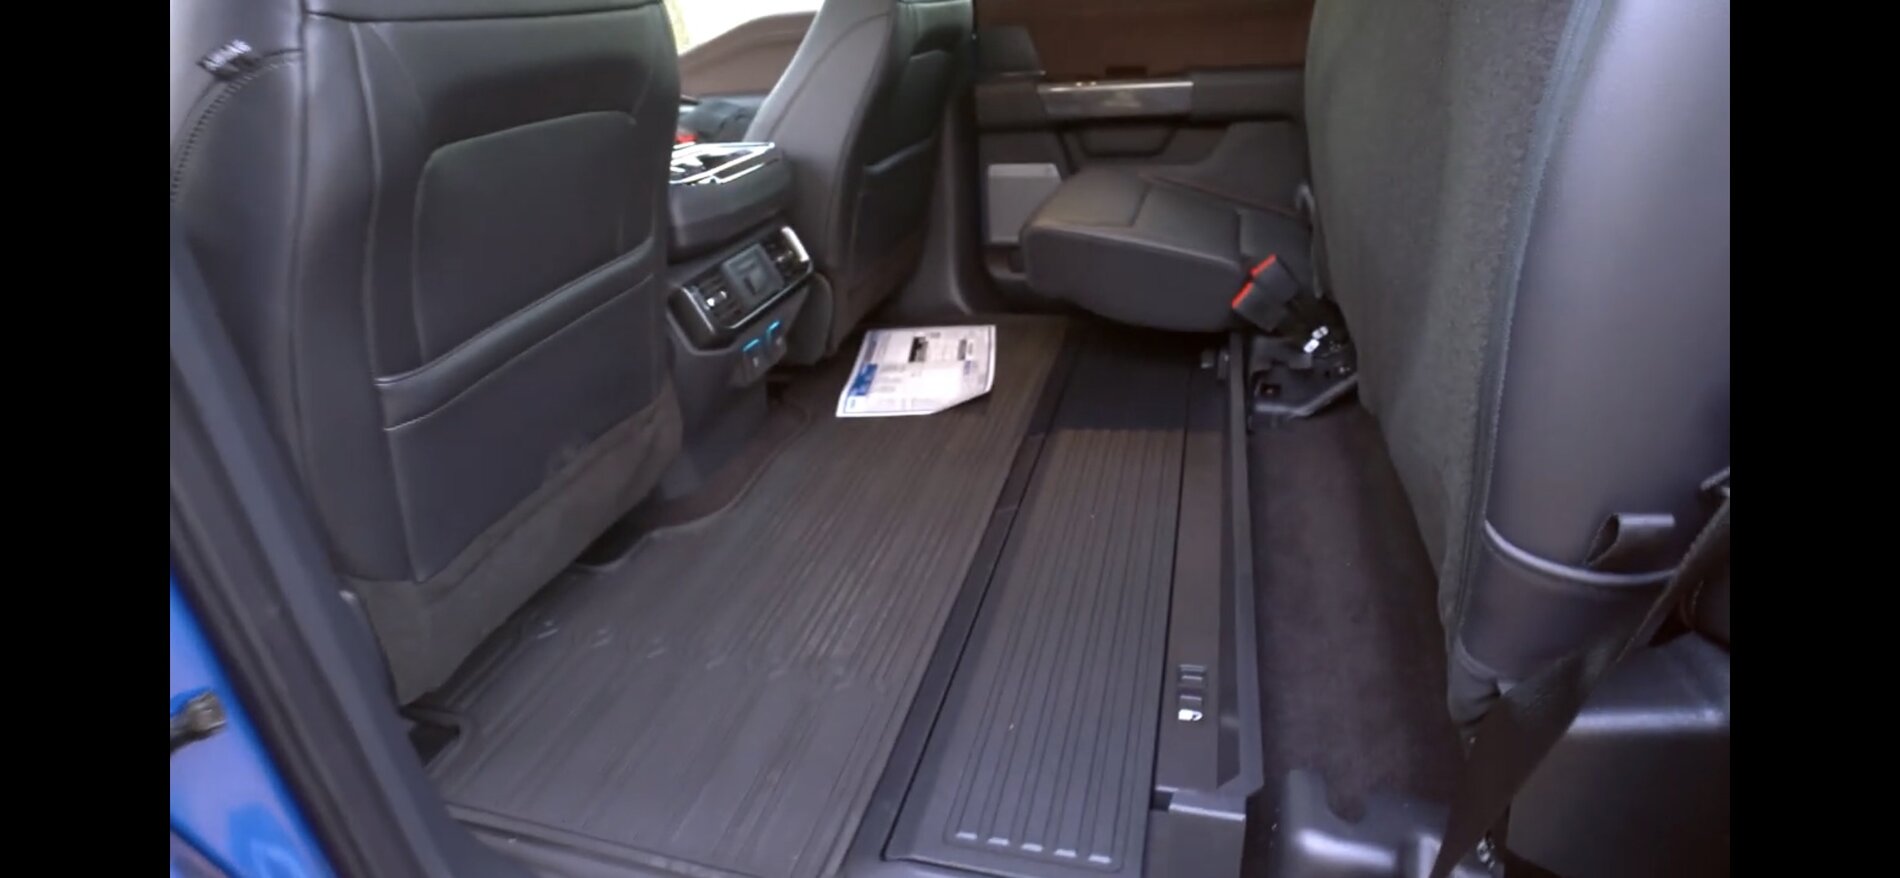 Ford F-150 Lightning Ford Tray style Floor Mats with the foldable lockable storage 1611468582846